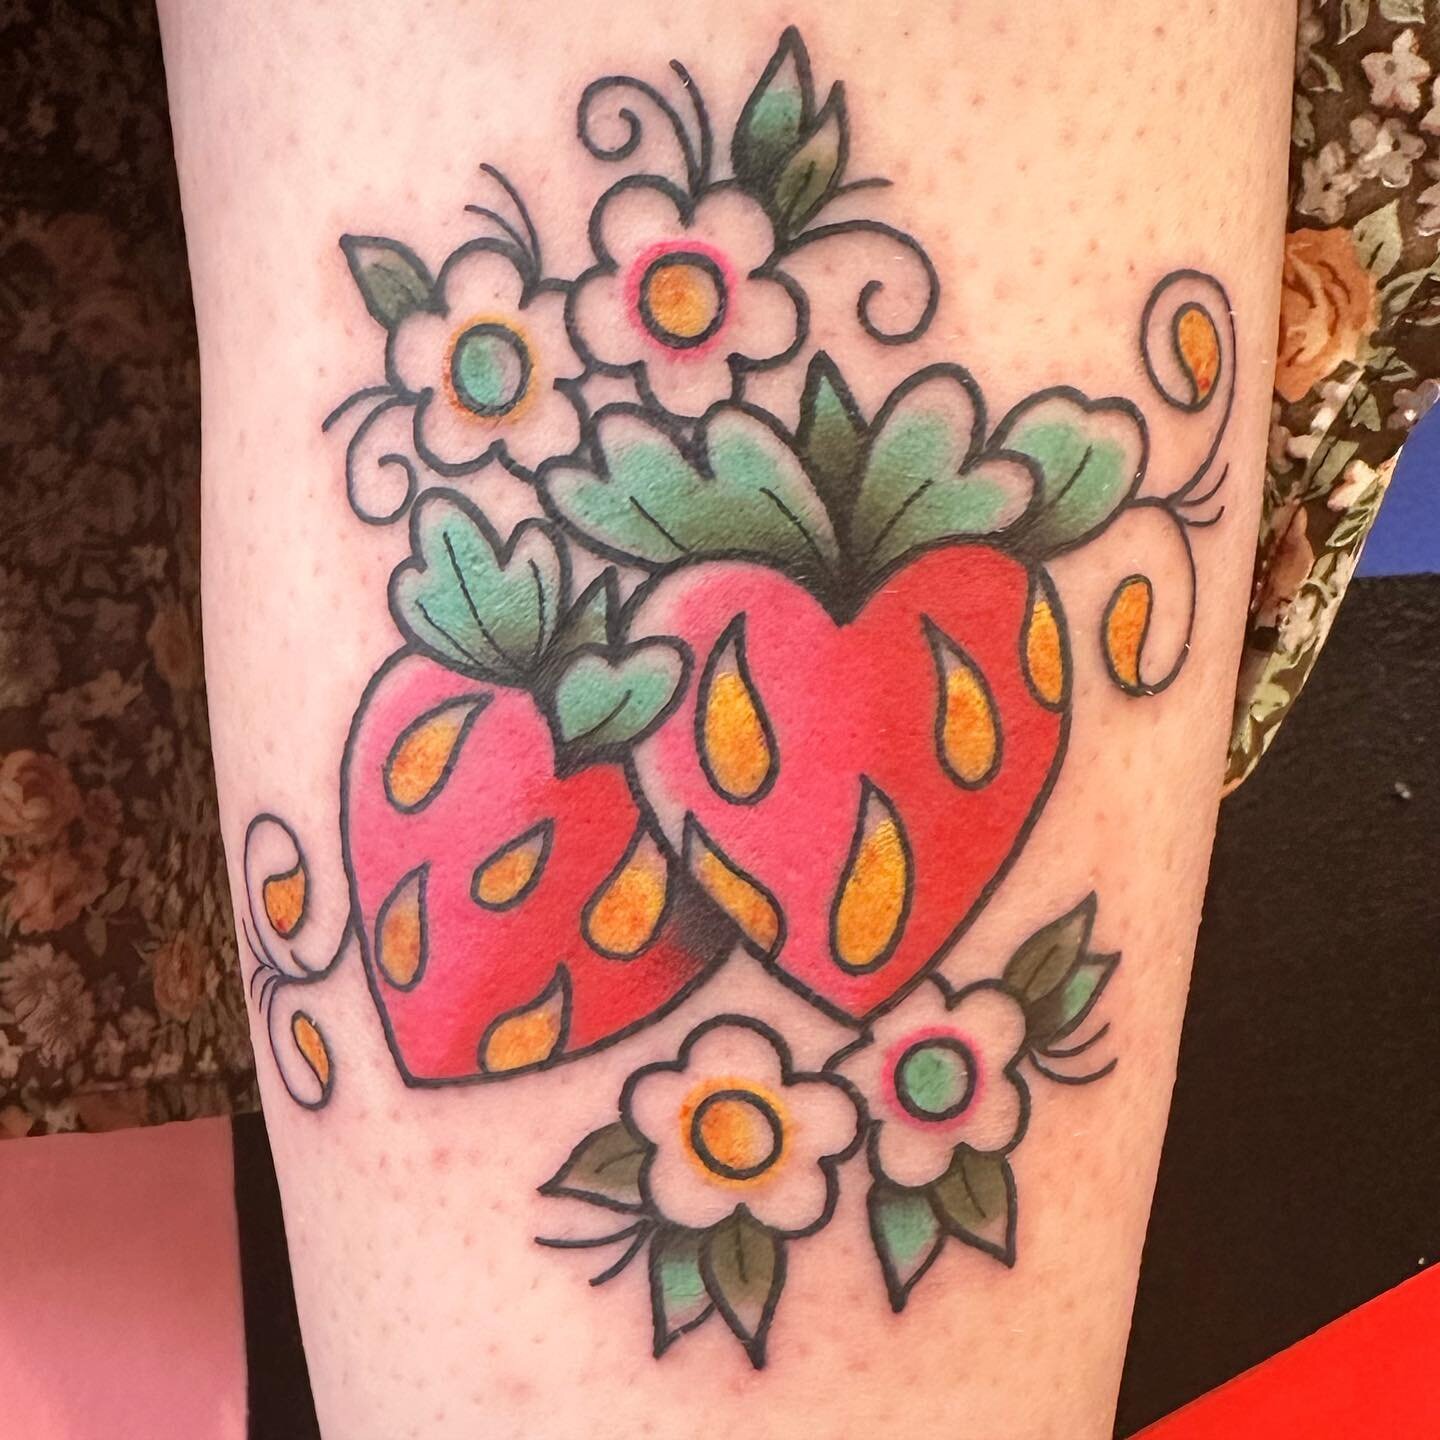 🍓Strawberries🍓off my flash for the lovely @beexrad! Thank you so much for the trust,
loved getting to tattoo ya. #strawberries #strawberrytattoo #tattoo #tattoos #kankakeecounty #kankakeetattoo #bradleyillinois #chicagotattoo #illinoistattoo